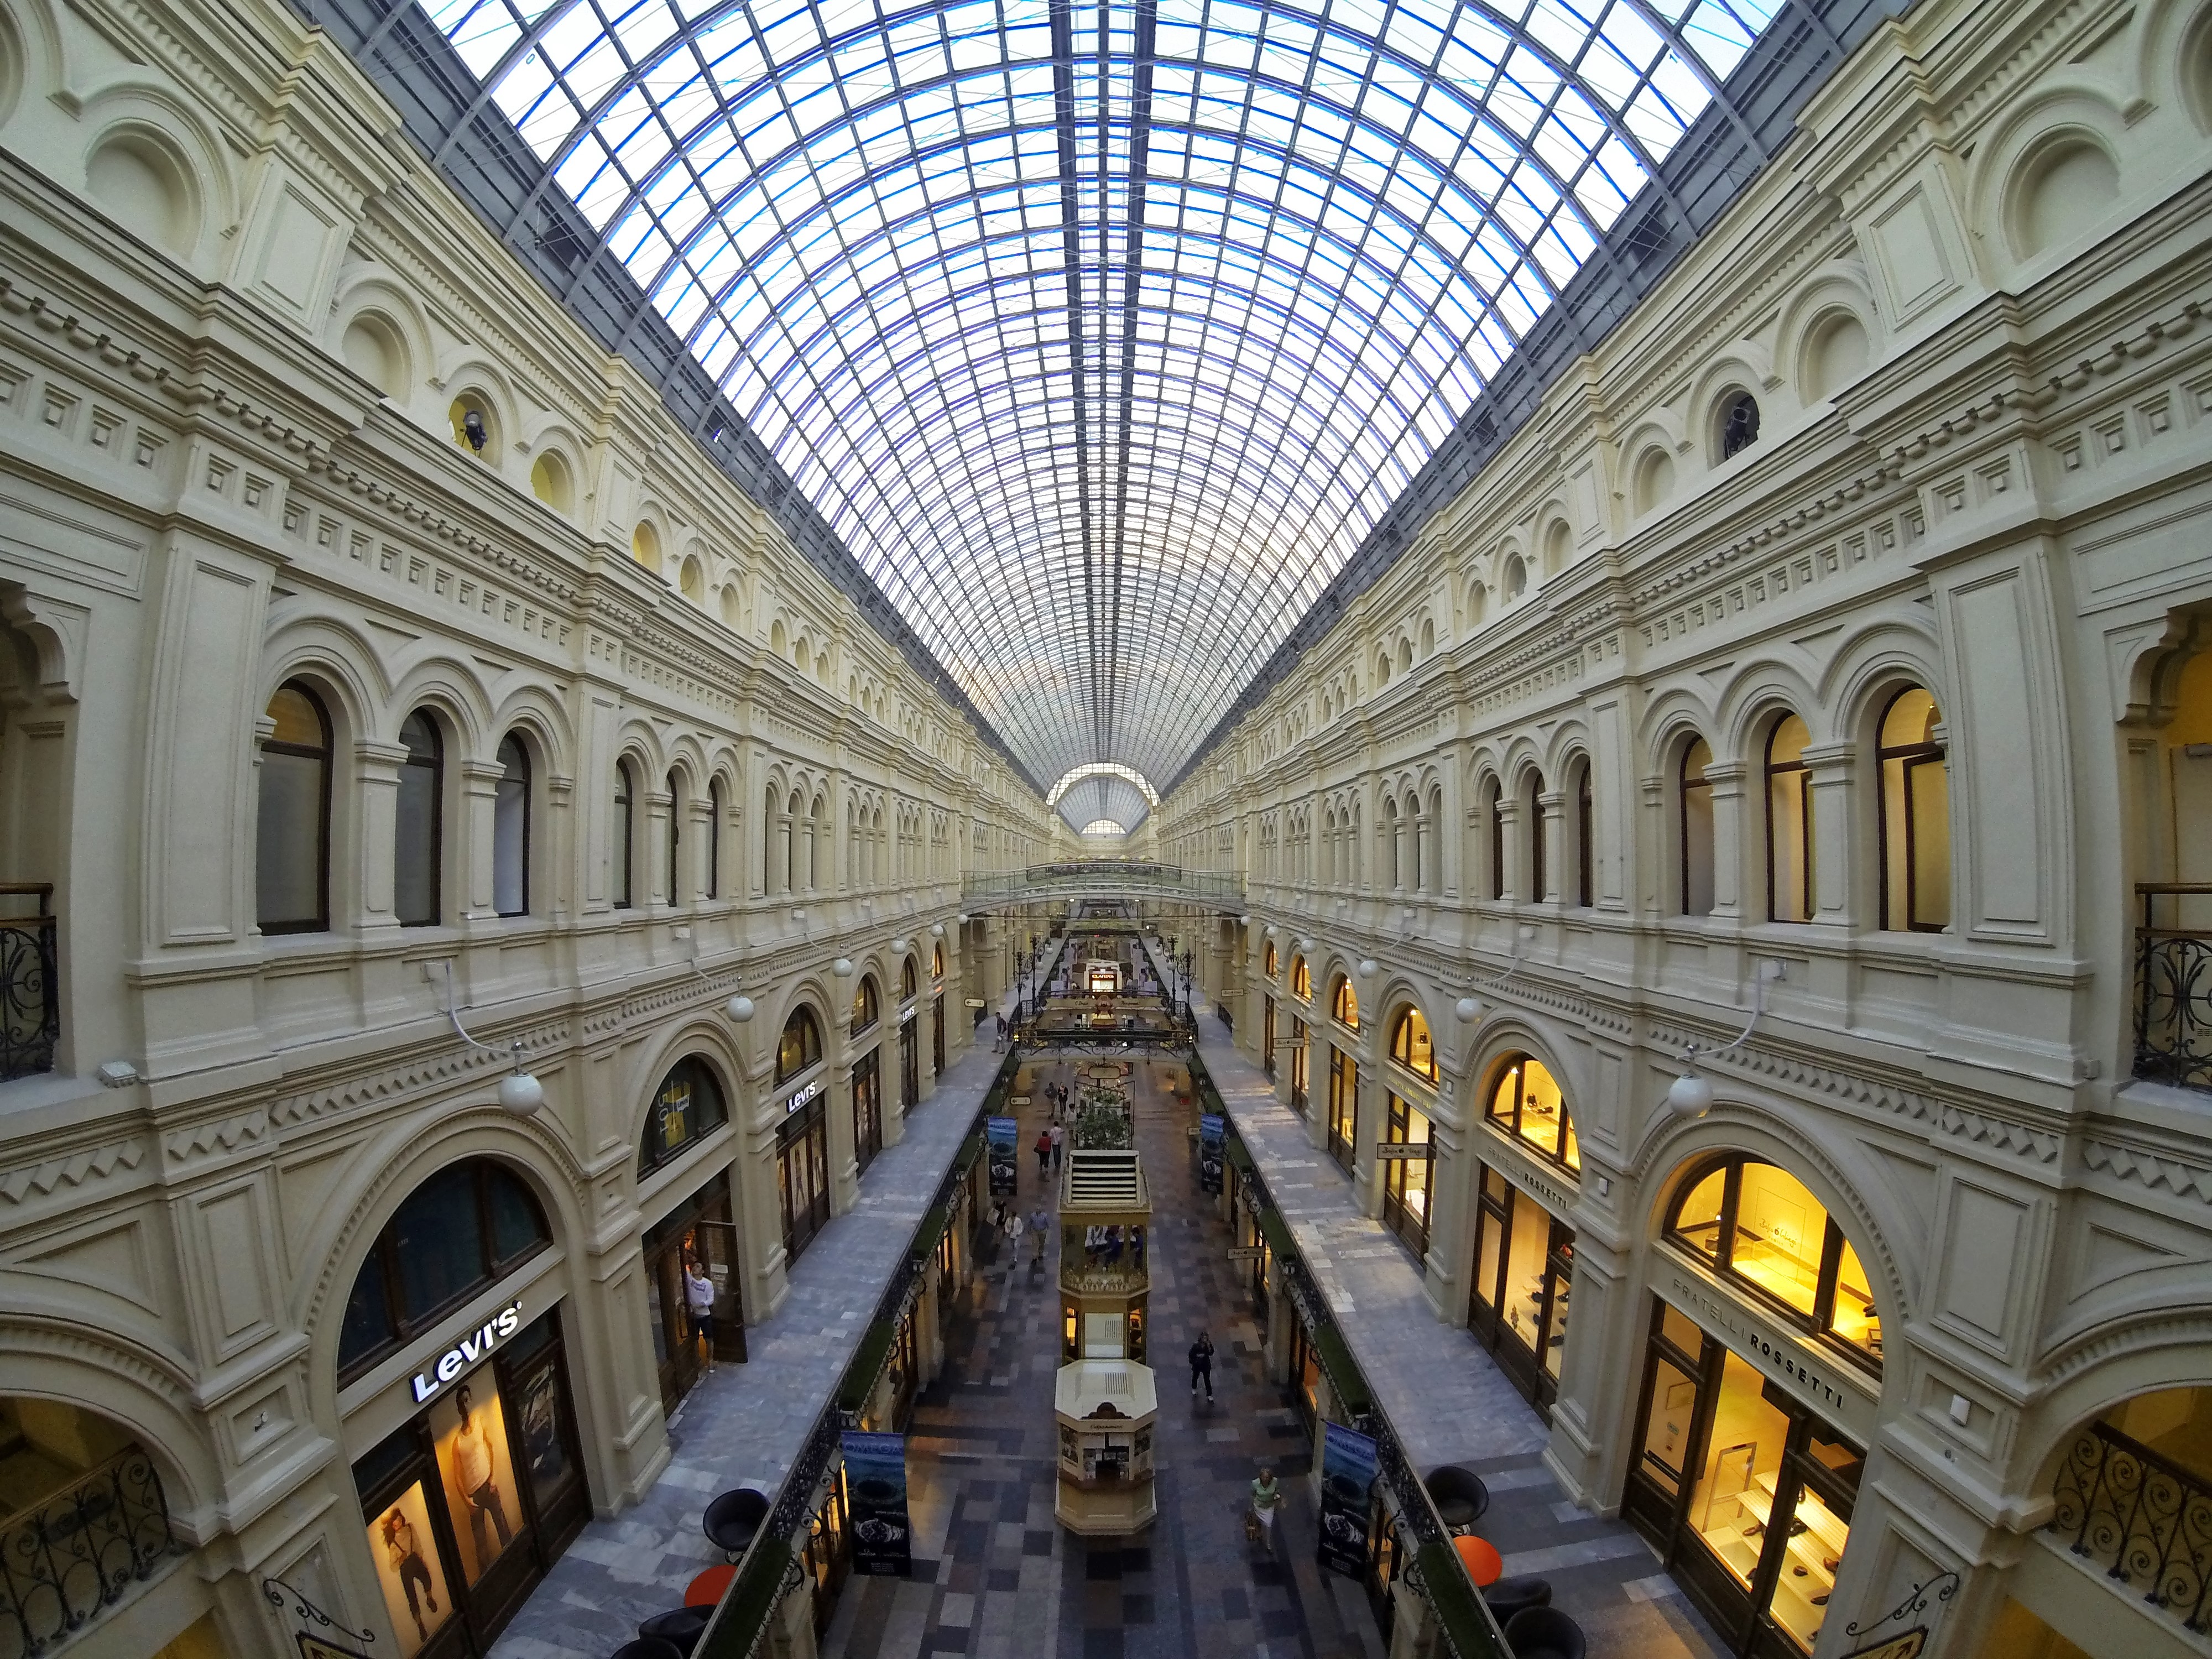 File:GUM department store in Moscow, Russia.jpg - Wikimedia Commons